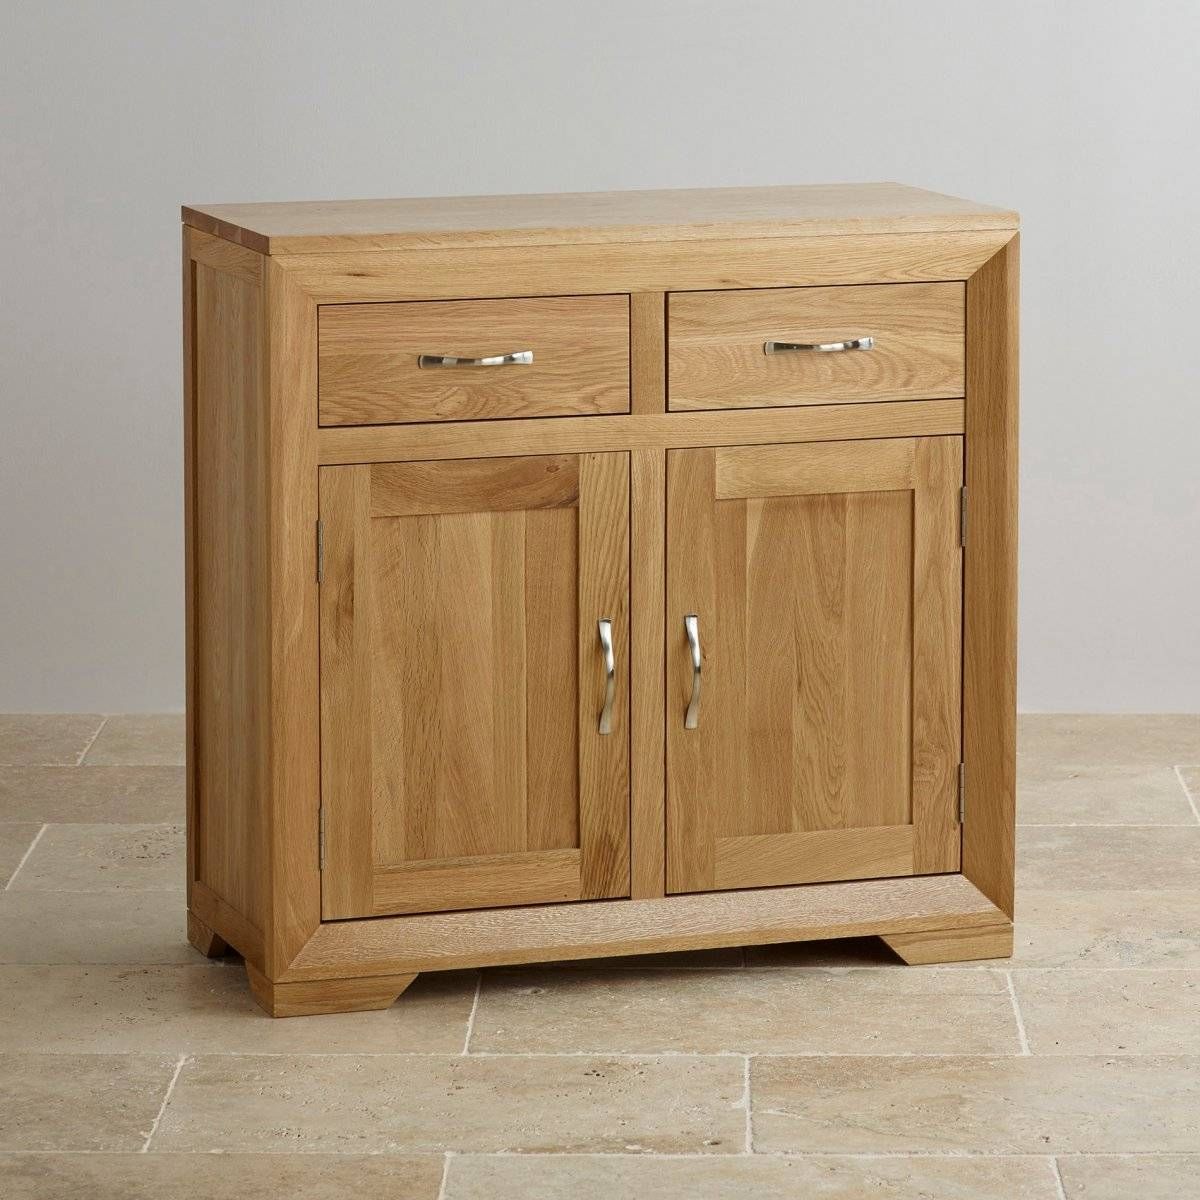 Bevel Small Sideboard In Natural Solid Oak | Oak Furniture Land Throughout Small Sideboards (View 2 of 20)